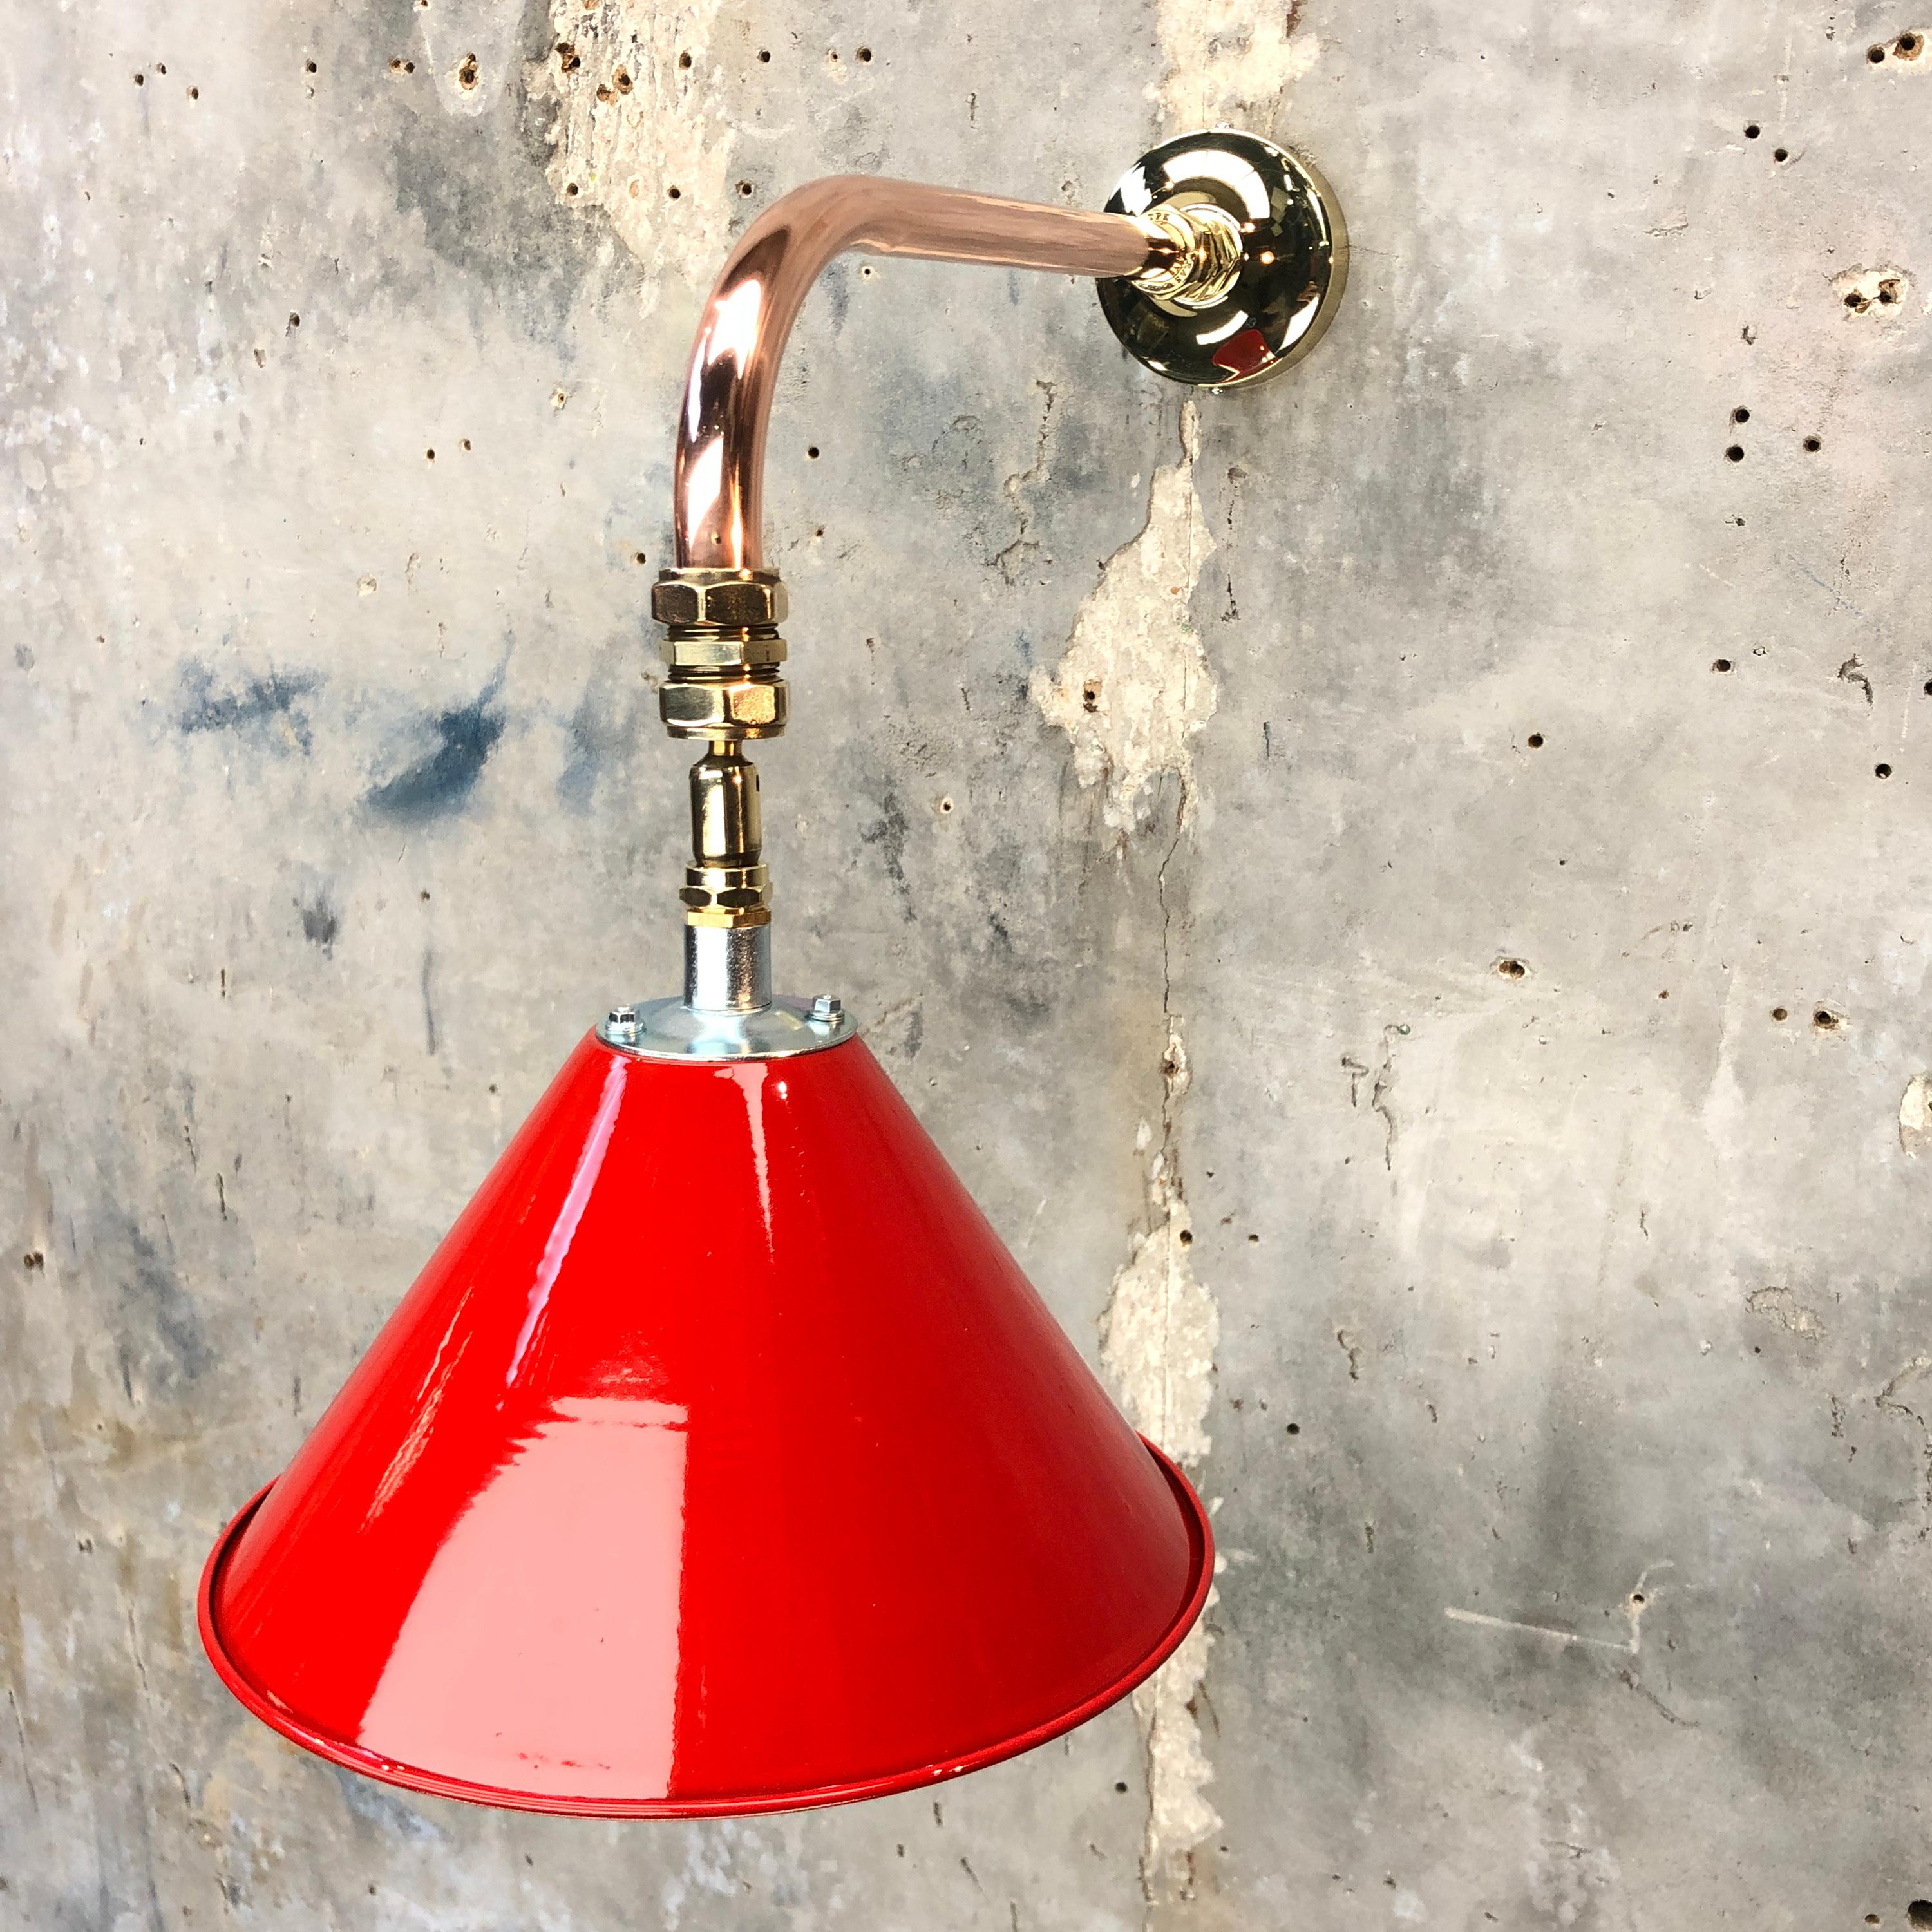 Machine-Made 1980 British Army Lamp Shade in Red with Copper Cantilever Wall Lamp Edison Bulb For Sale